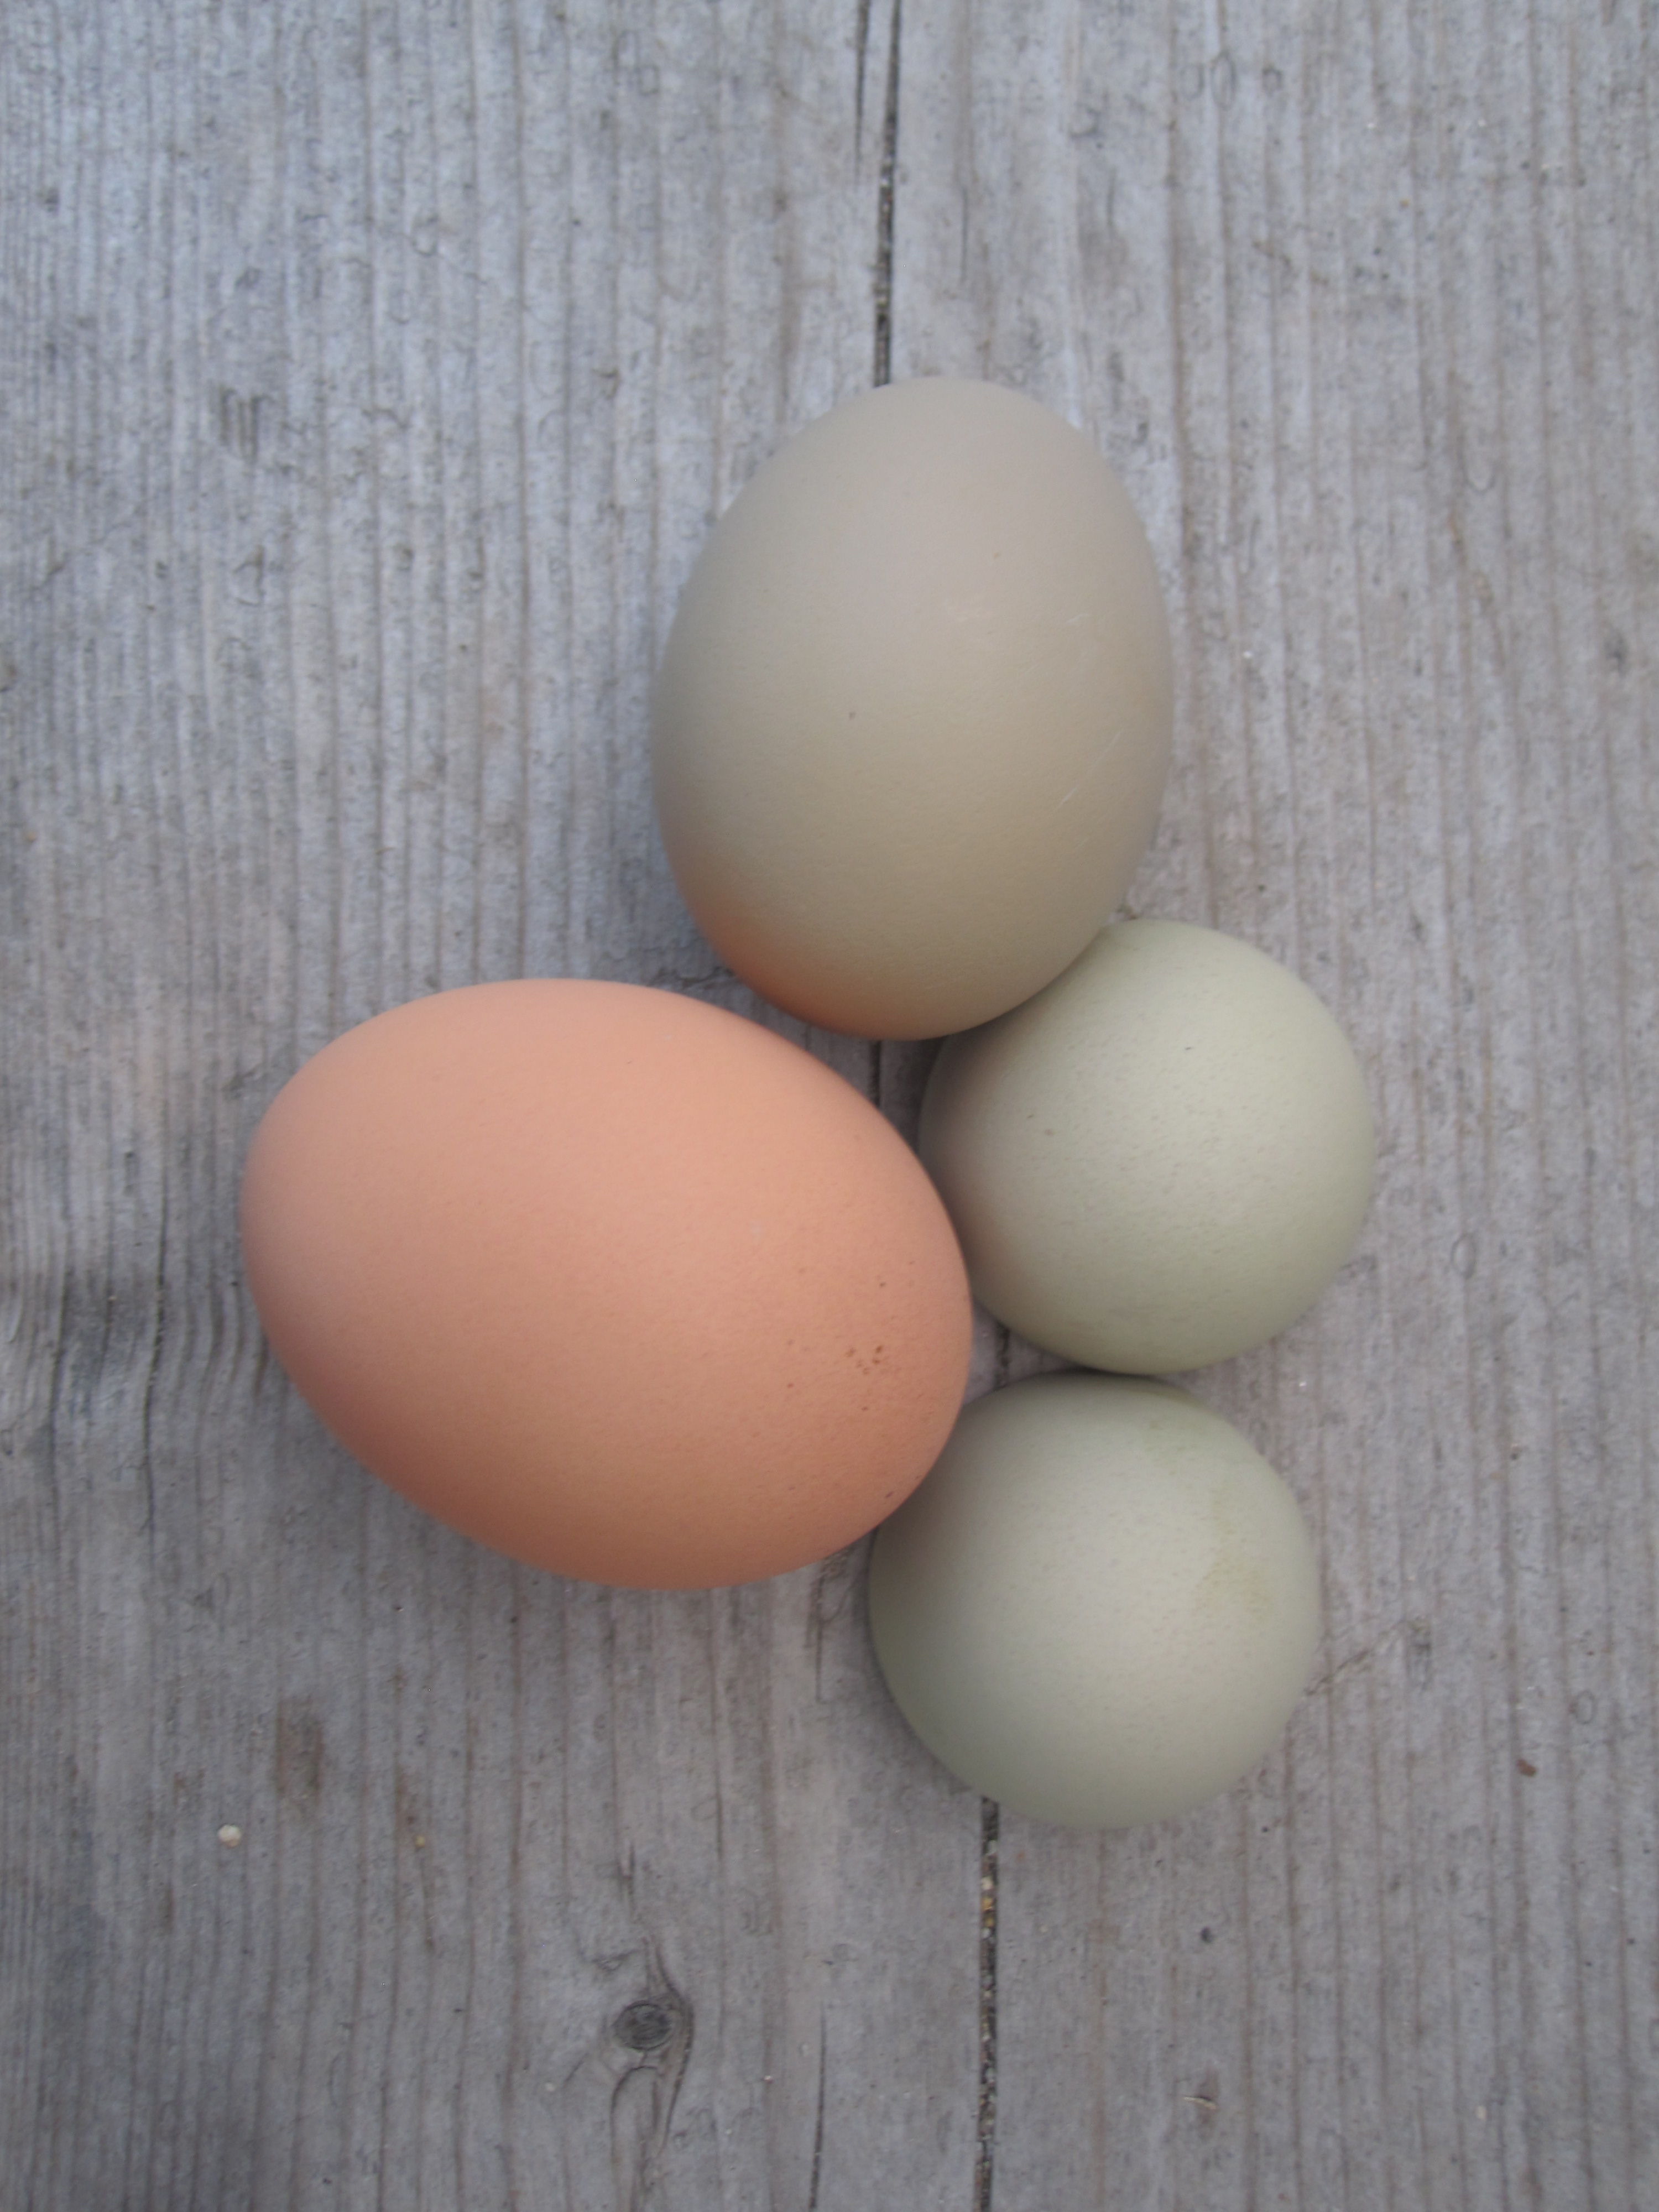 Molly's first egg! Laid on May 19, 2014. The top egg in the photo. The green half shells are from Sadie's first egg.  The brown egg is one of our older girls, Henny.